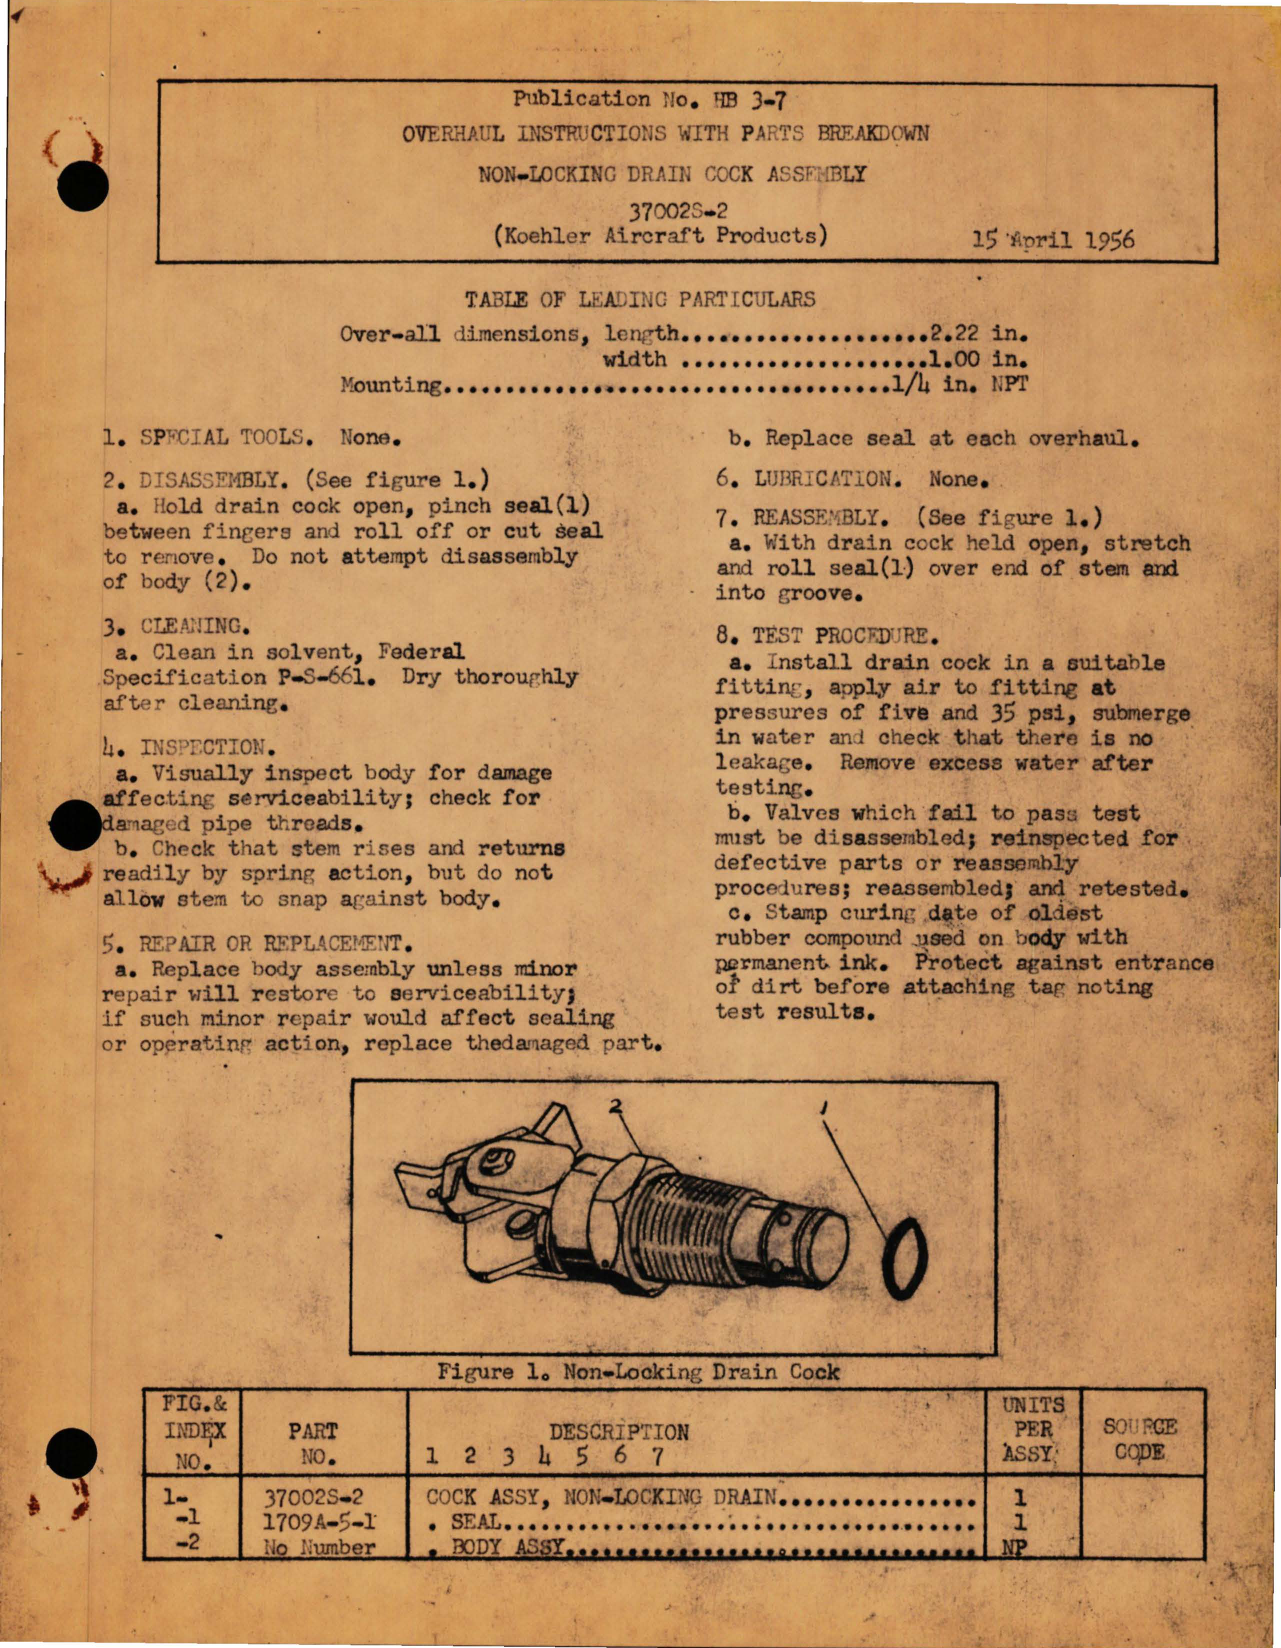 Sample page 1 from AirCorps Library document: Overhaul Instructions with Parts Breakdown for Non-Locking Drain Cock Assembly - 37002S-2